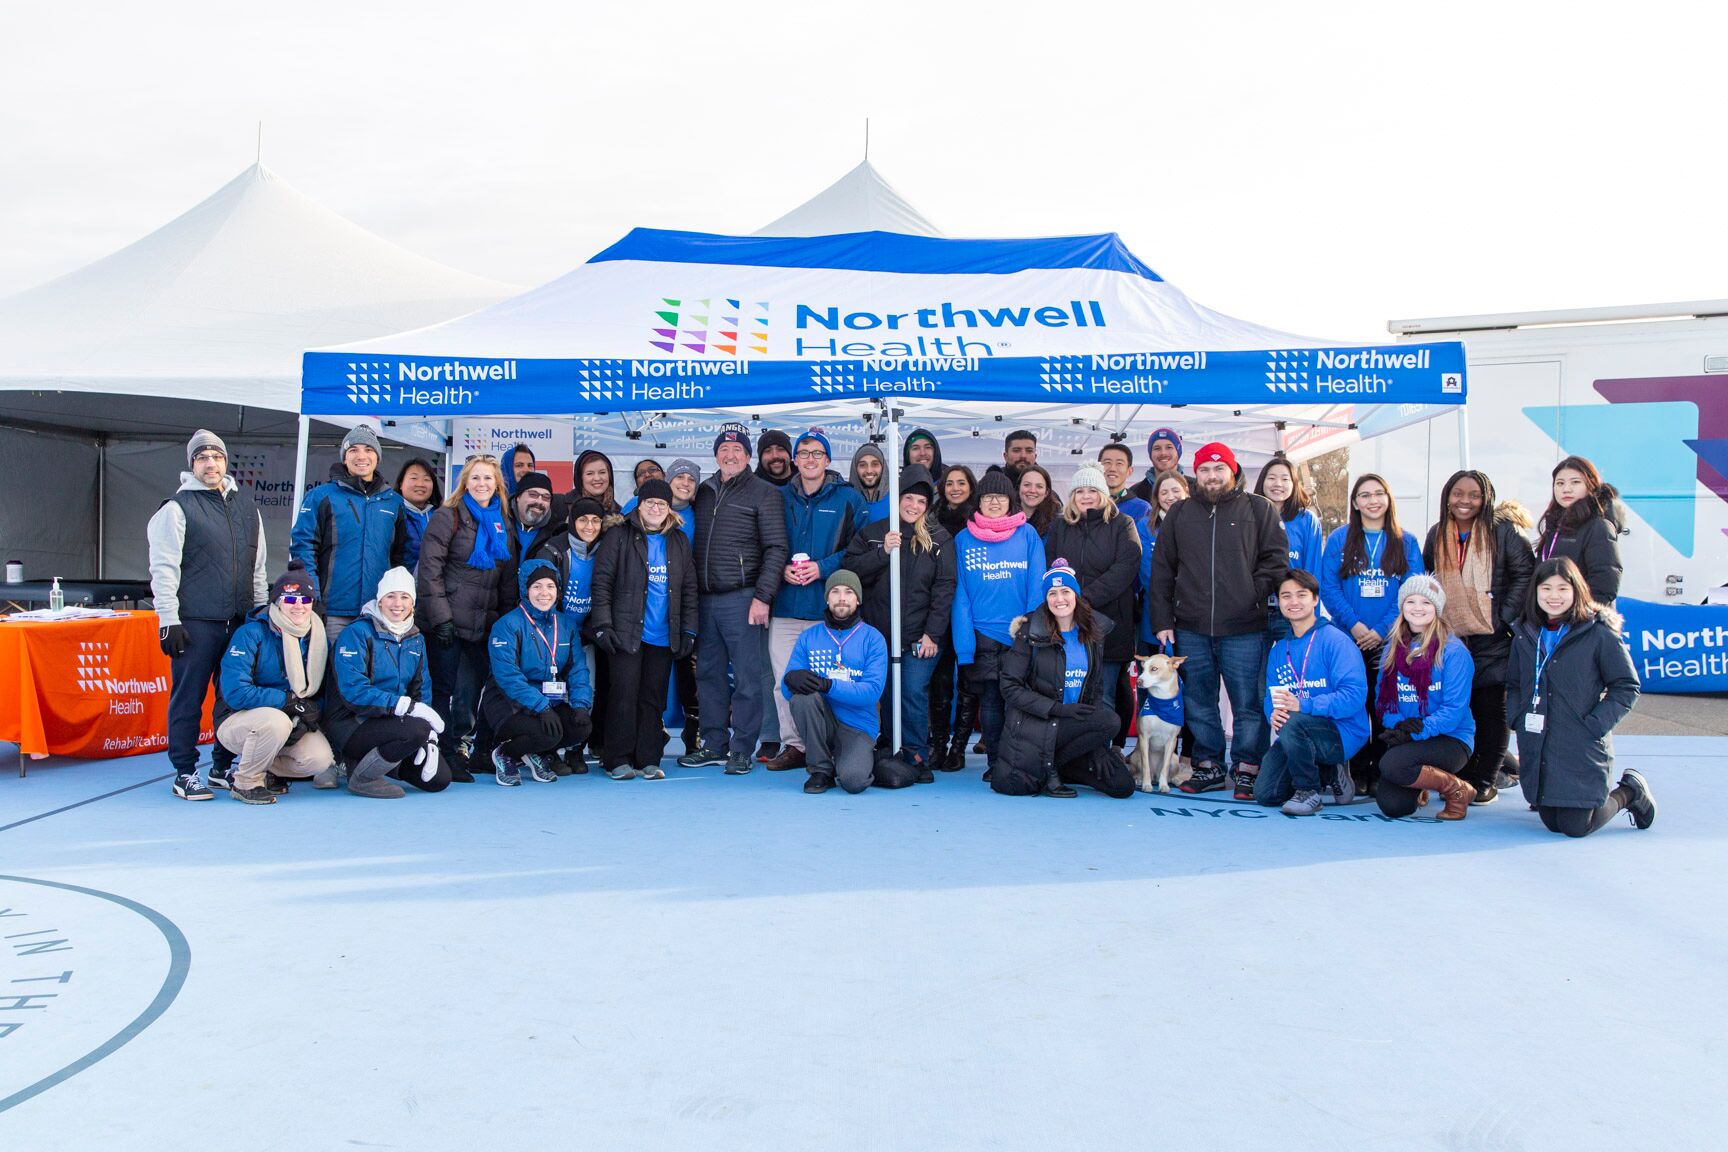 a group of cheerful individuals posing in front of a spacious 10x20 canopy tent emblazoned with the 'Northwell Health' logo